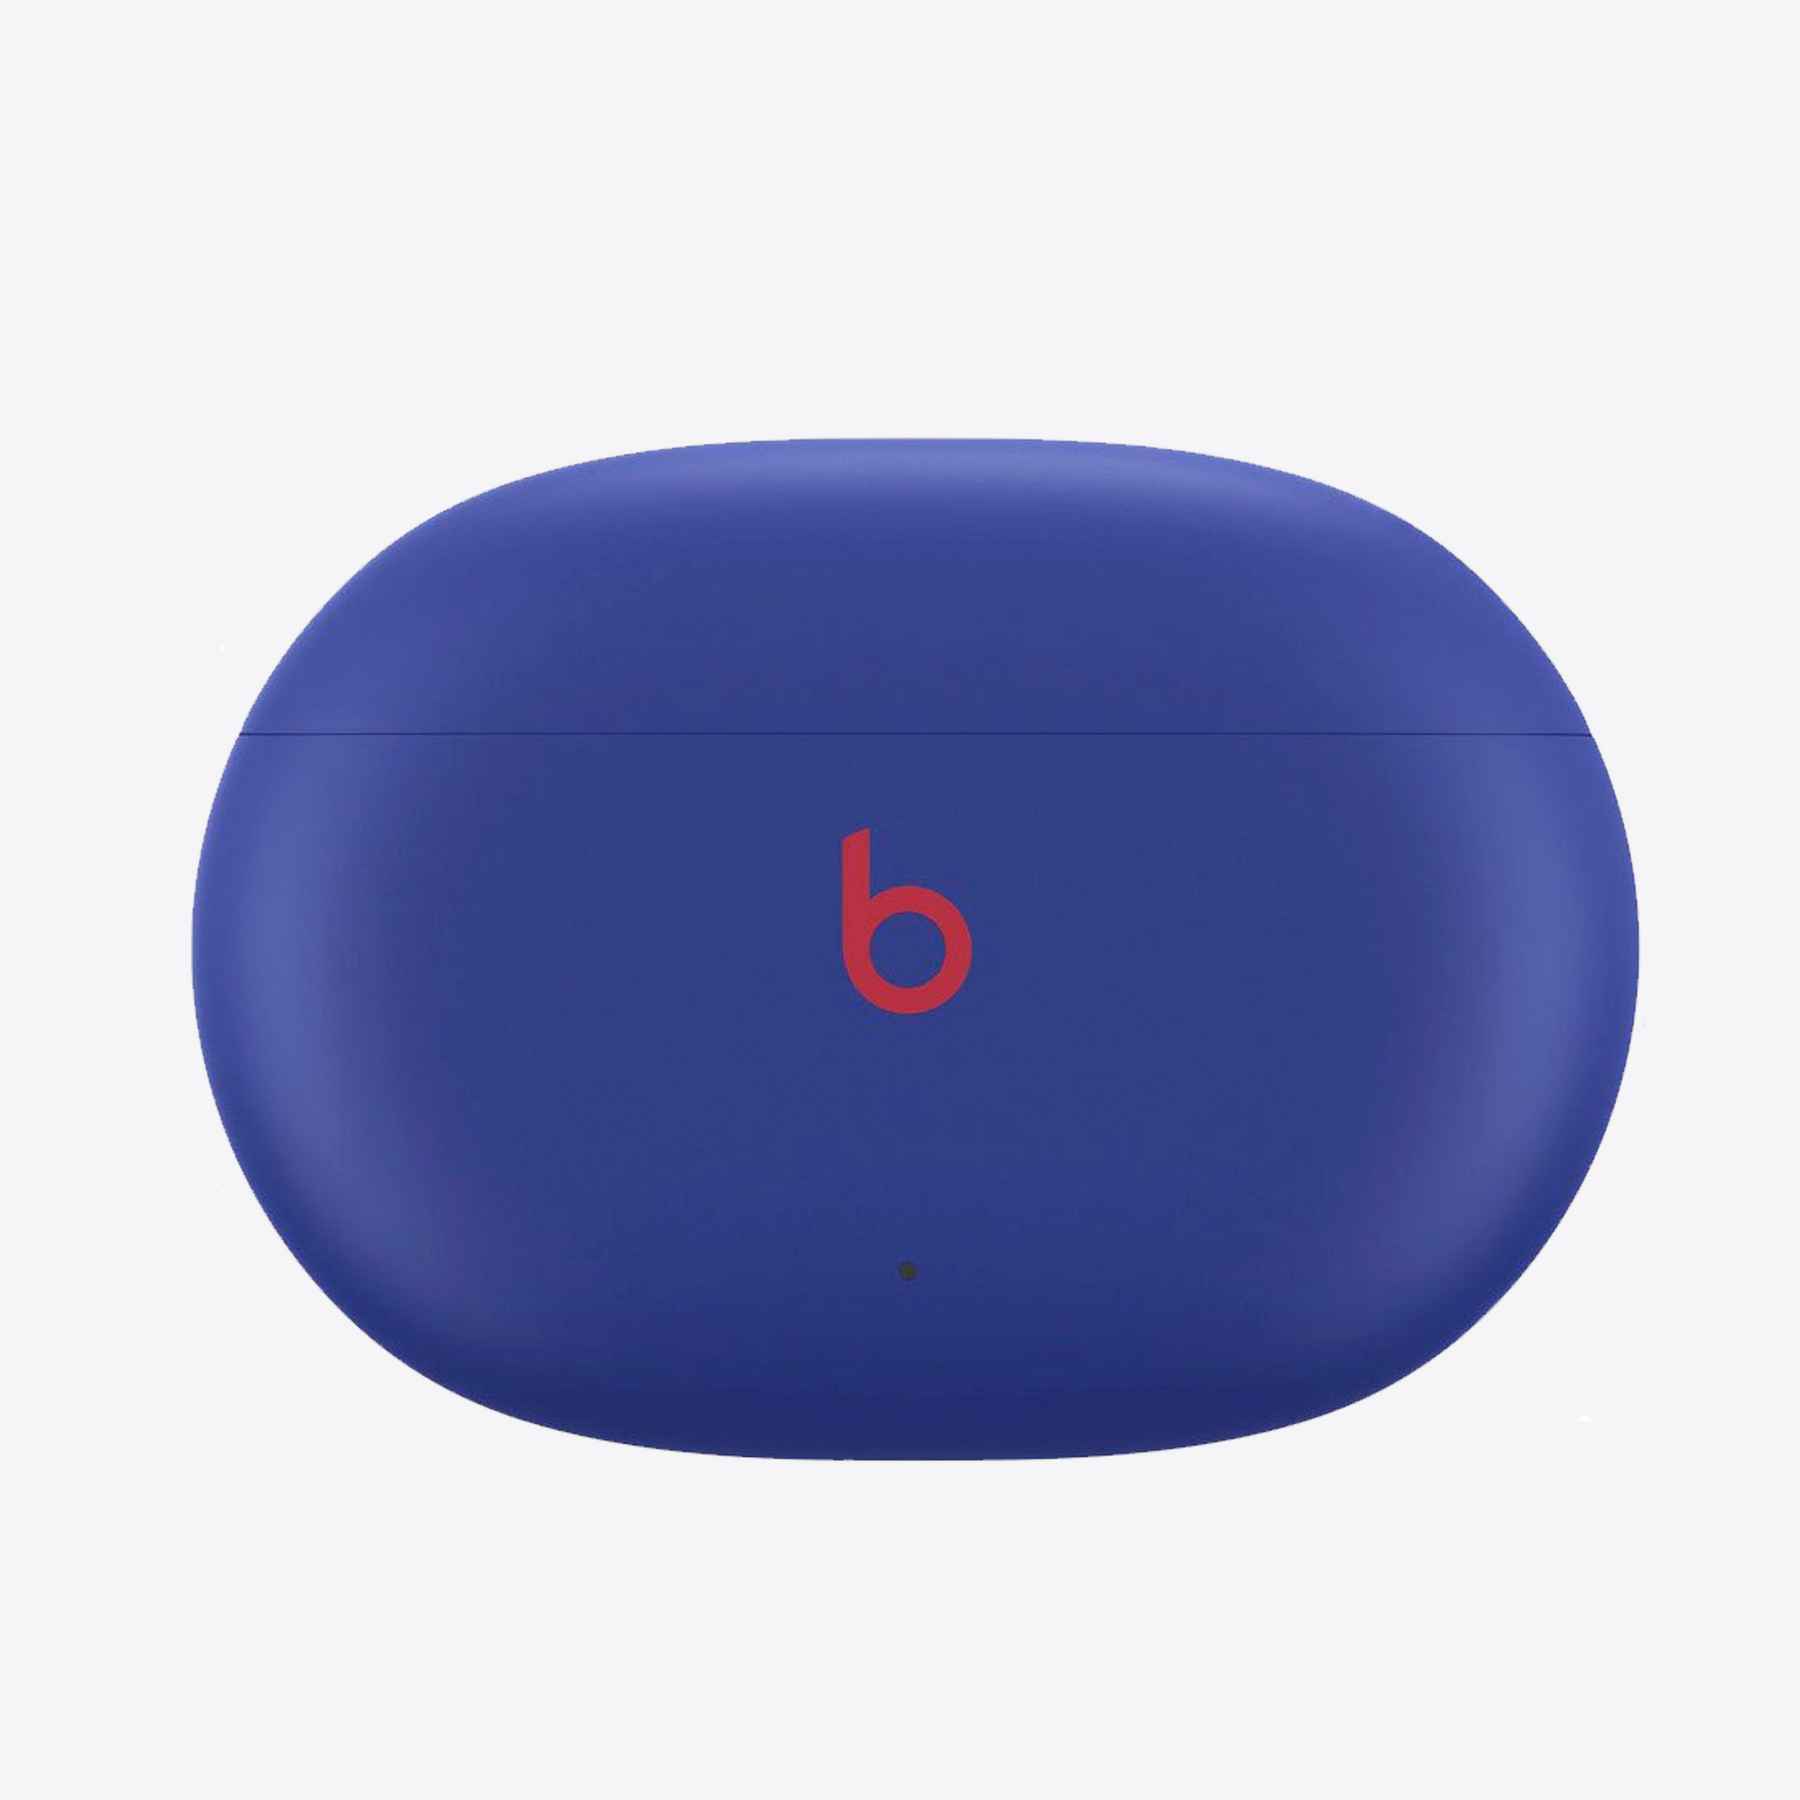 Genuine Beats Studio Buds Replacement Part LEFT or RIGHT or CHARGING CASE  BLACK